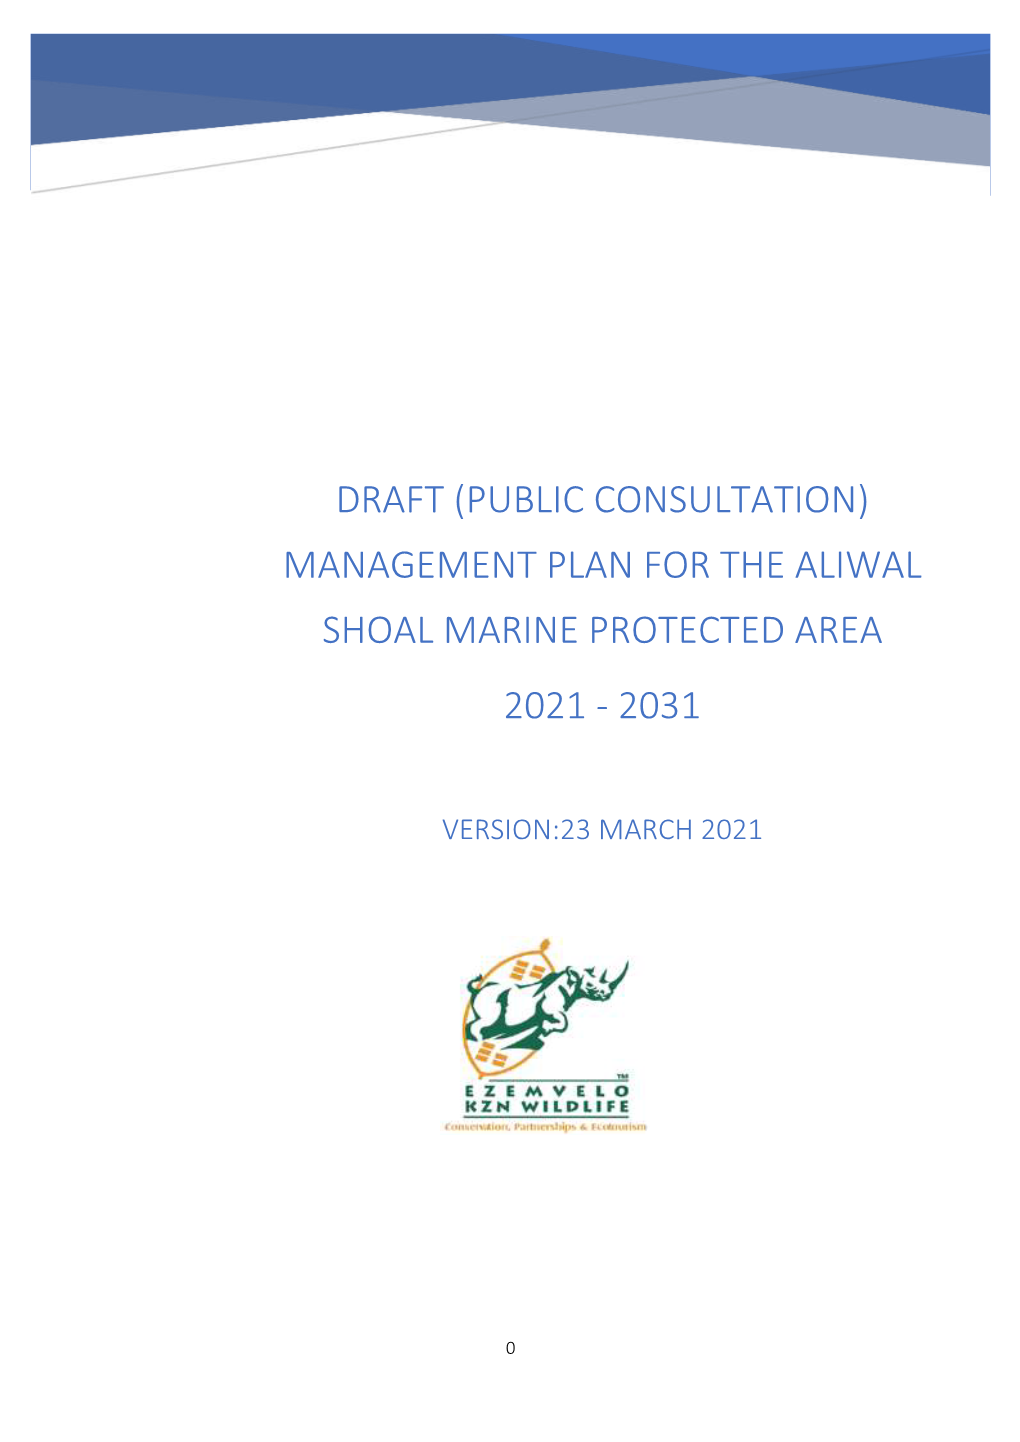 Draft (Public Consultation) Management Plan for the Aliwal Shoal Marine Protected Area 2021 - 2031